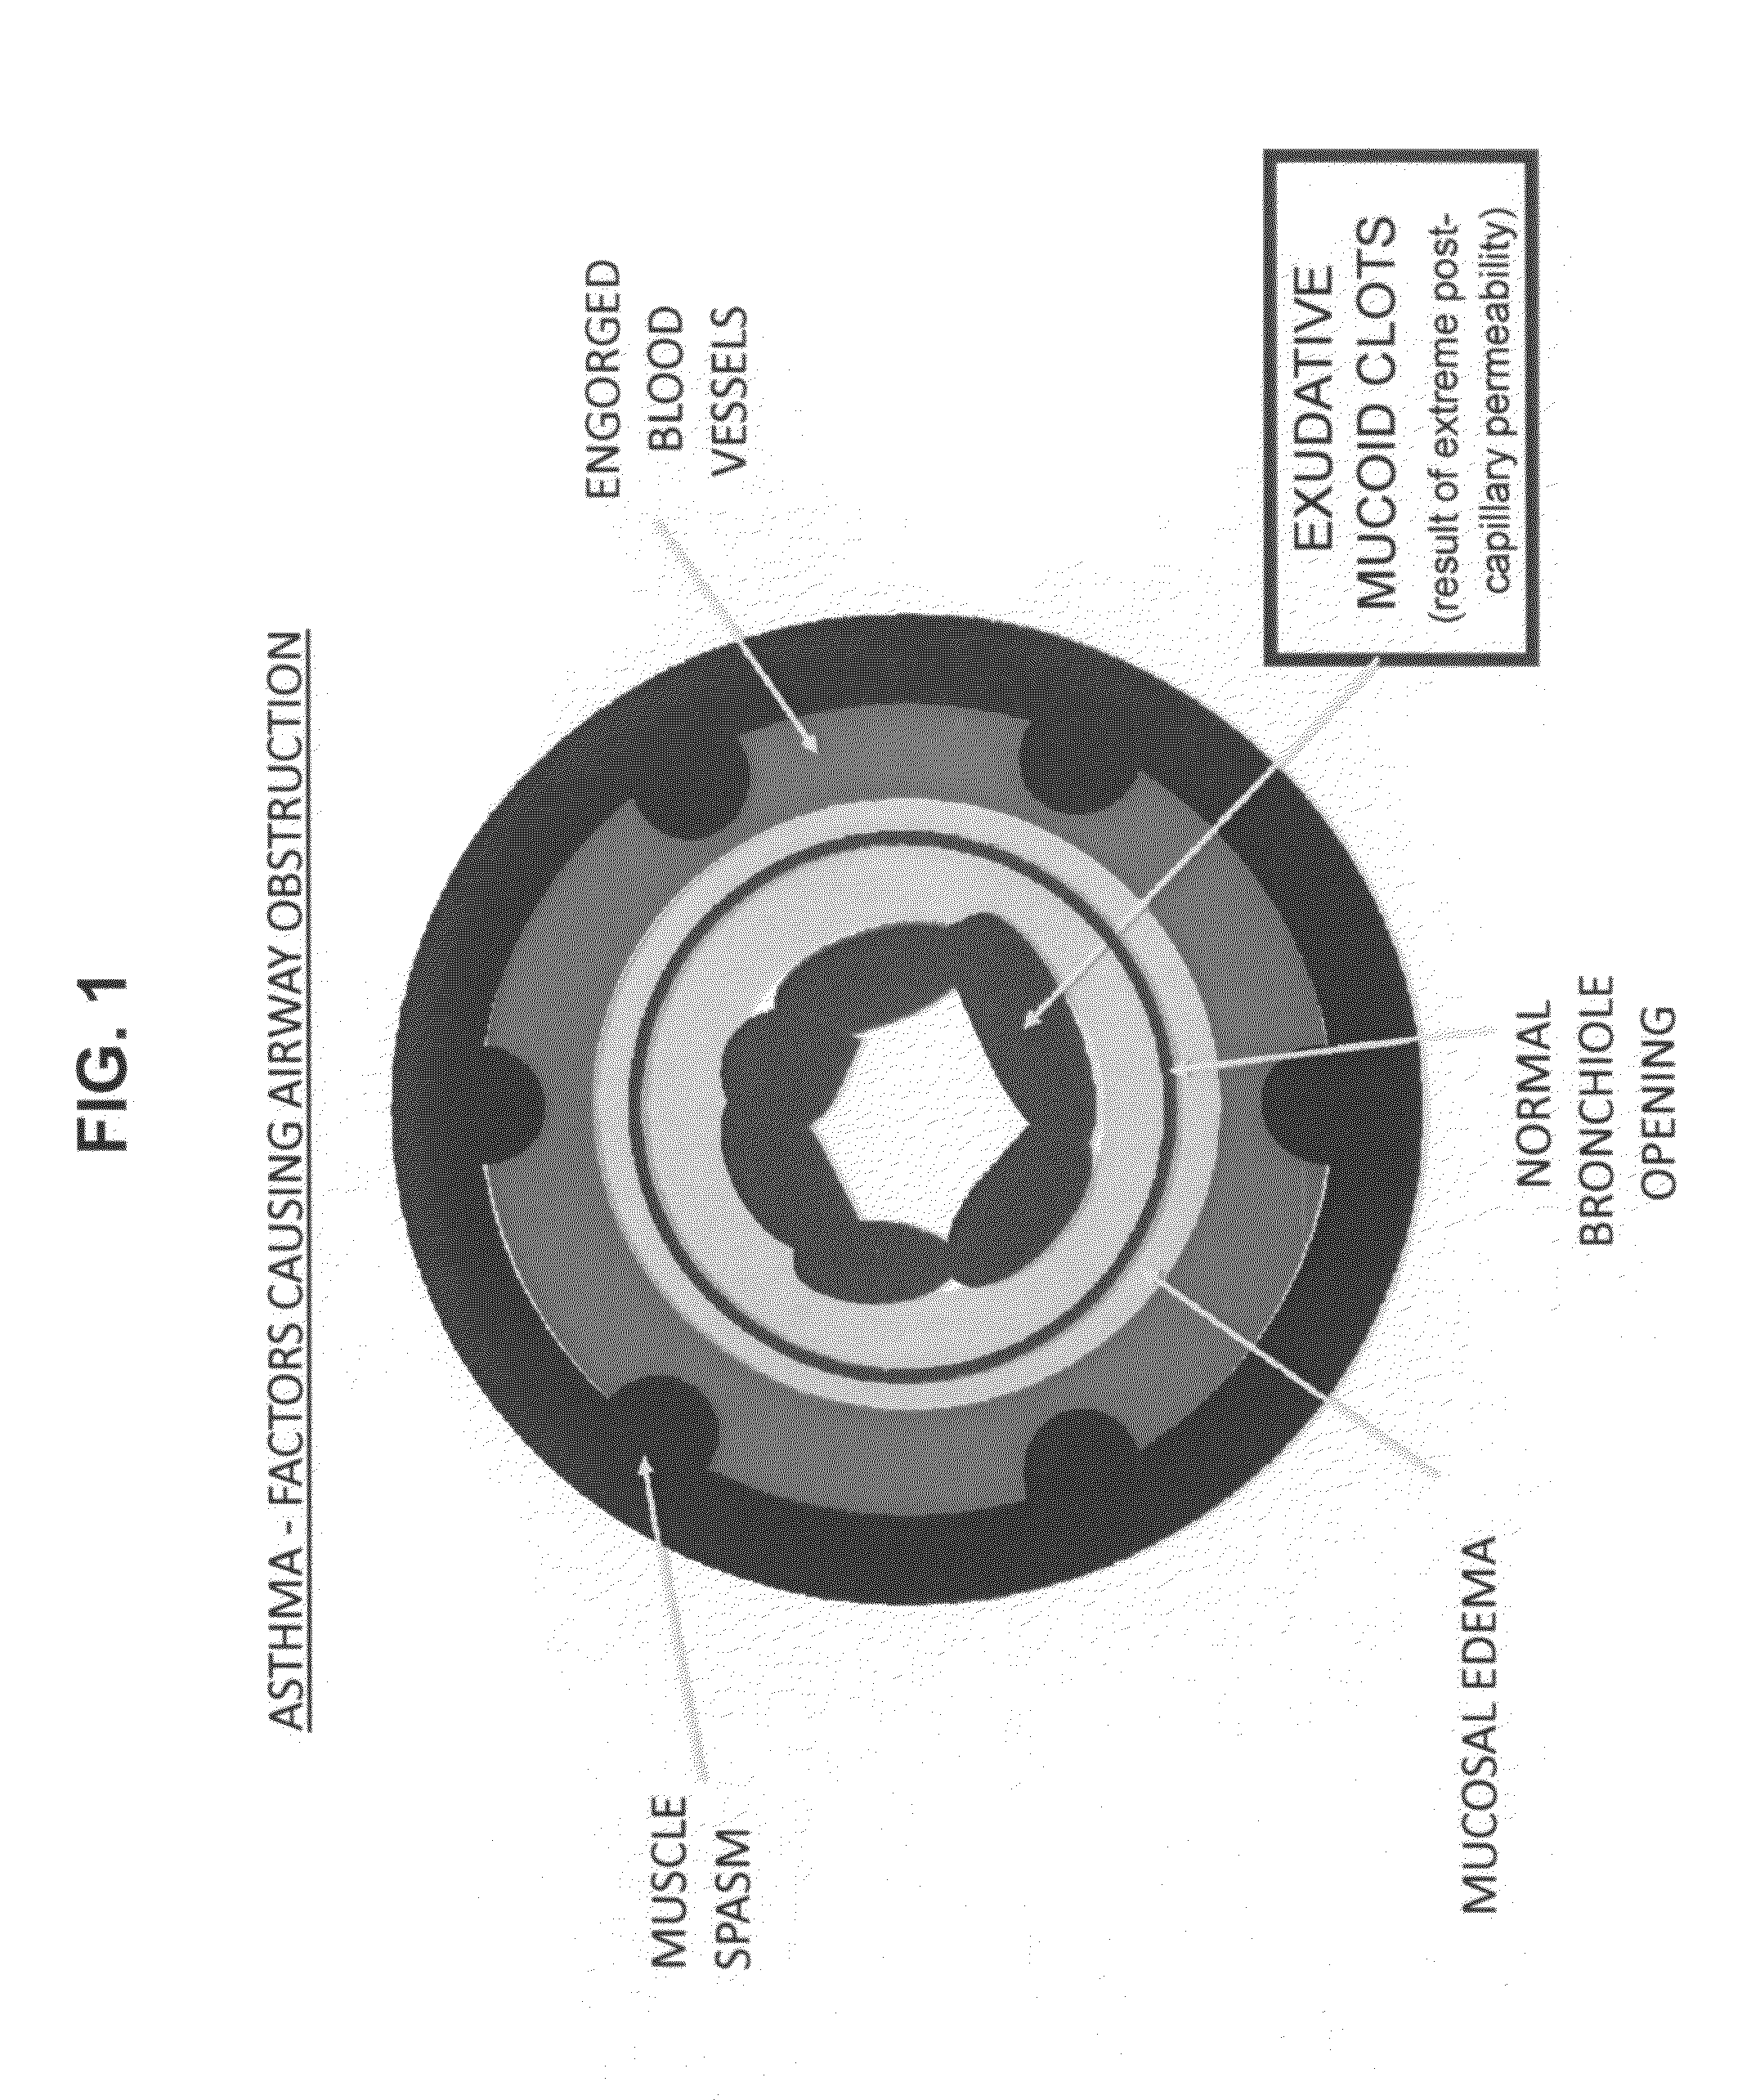 Compositions and methods for treatment of pulmonary diseases and conditions